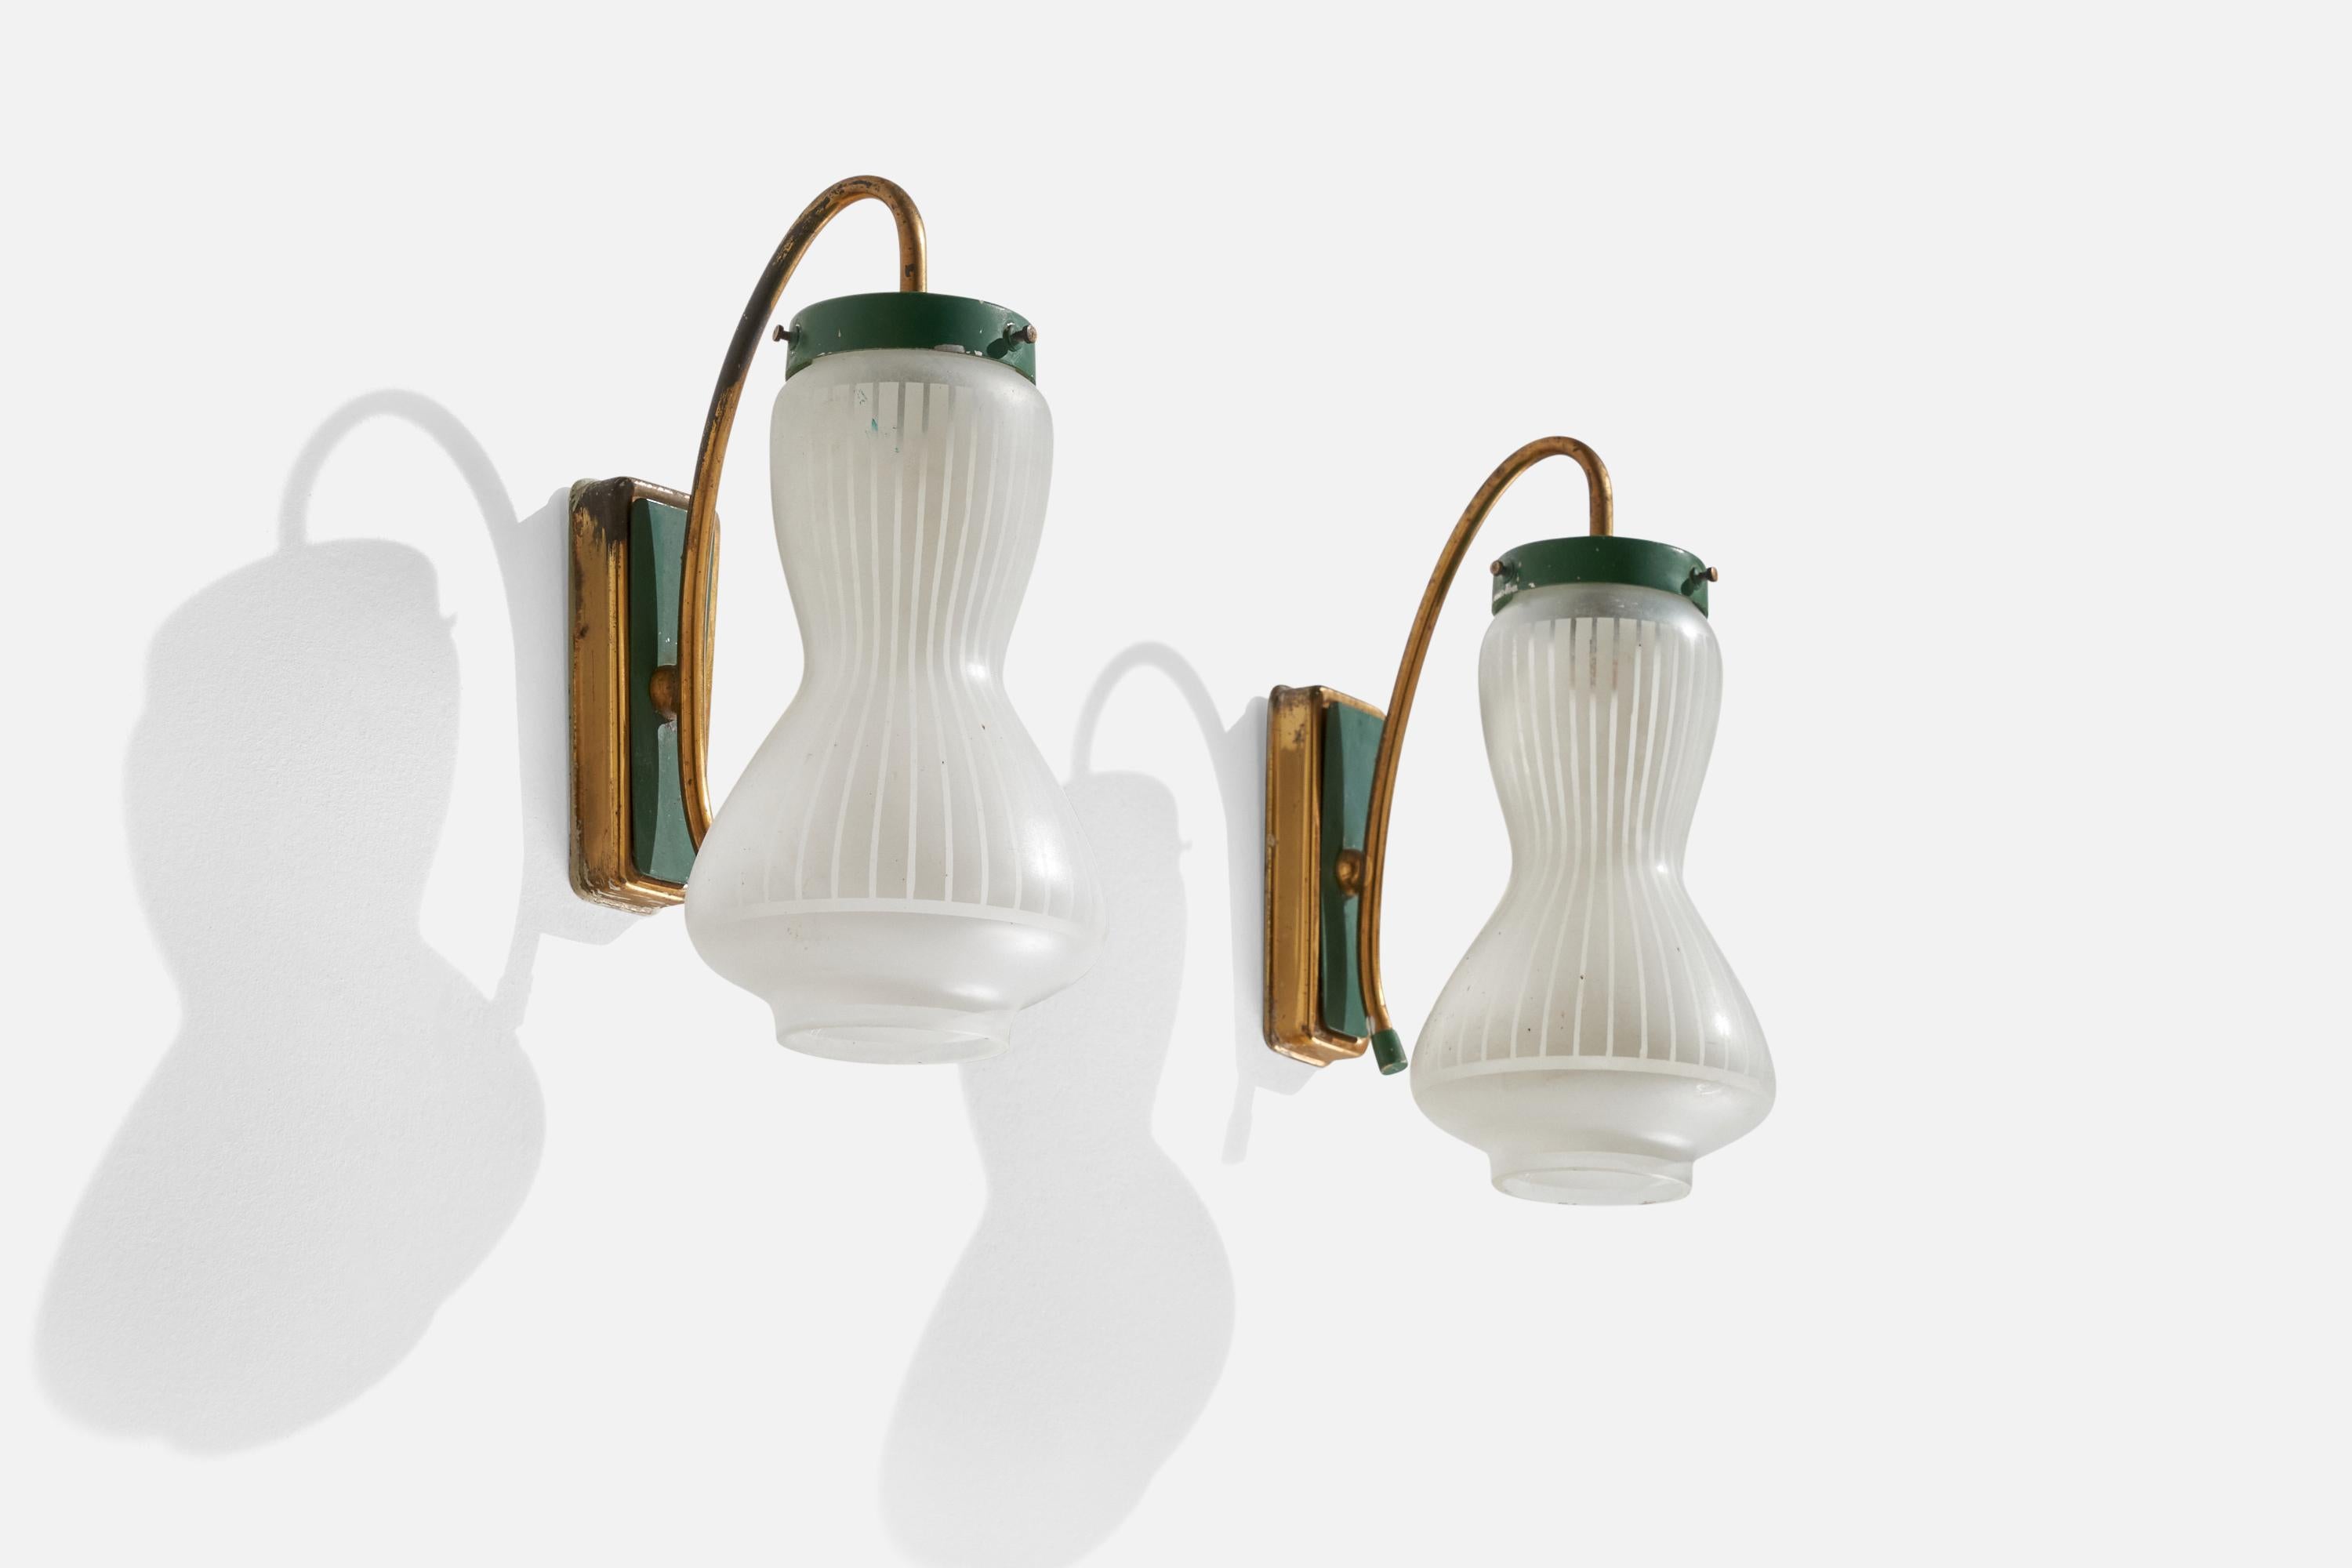 A pair of brass, green-lacquered metal and etched glass wall lights designed and produced in Italy, 1950s.

Overall Dimensions (inches): 9.75” H x 4.75” W x 6” D
Back Plate Dimensions (inches): 4.8” H x 1.9” W x 0.8” D
Bulb Specifications: E-14